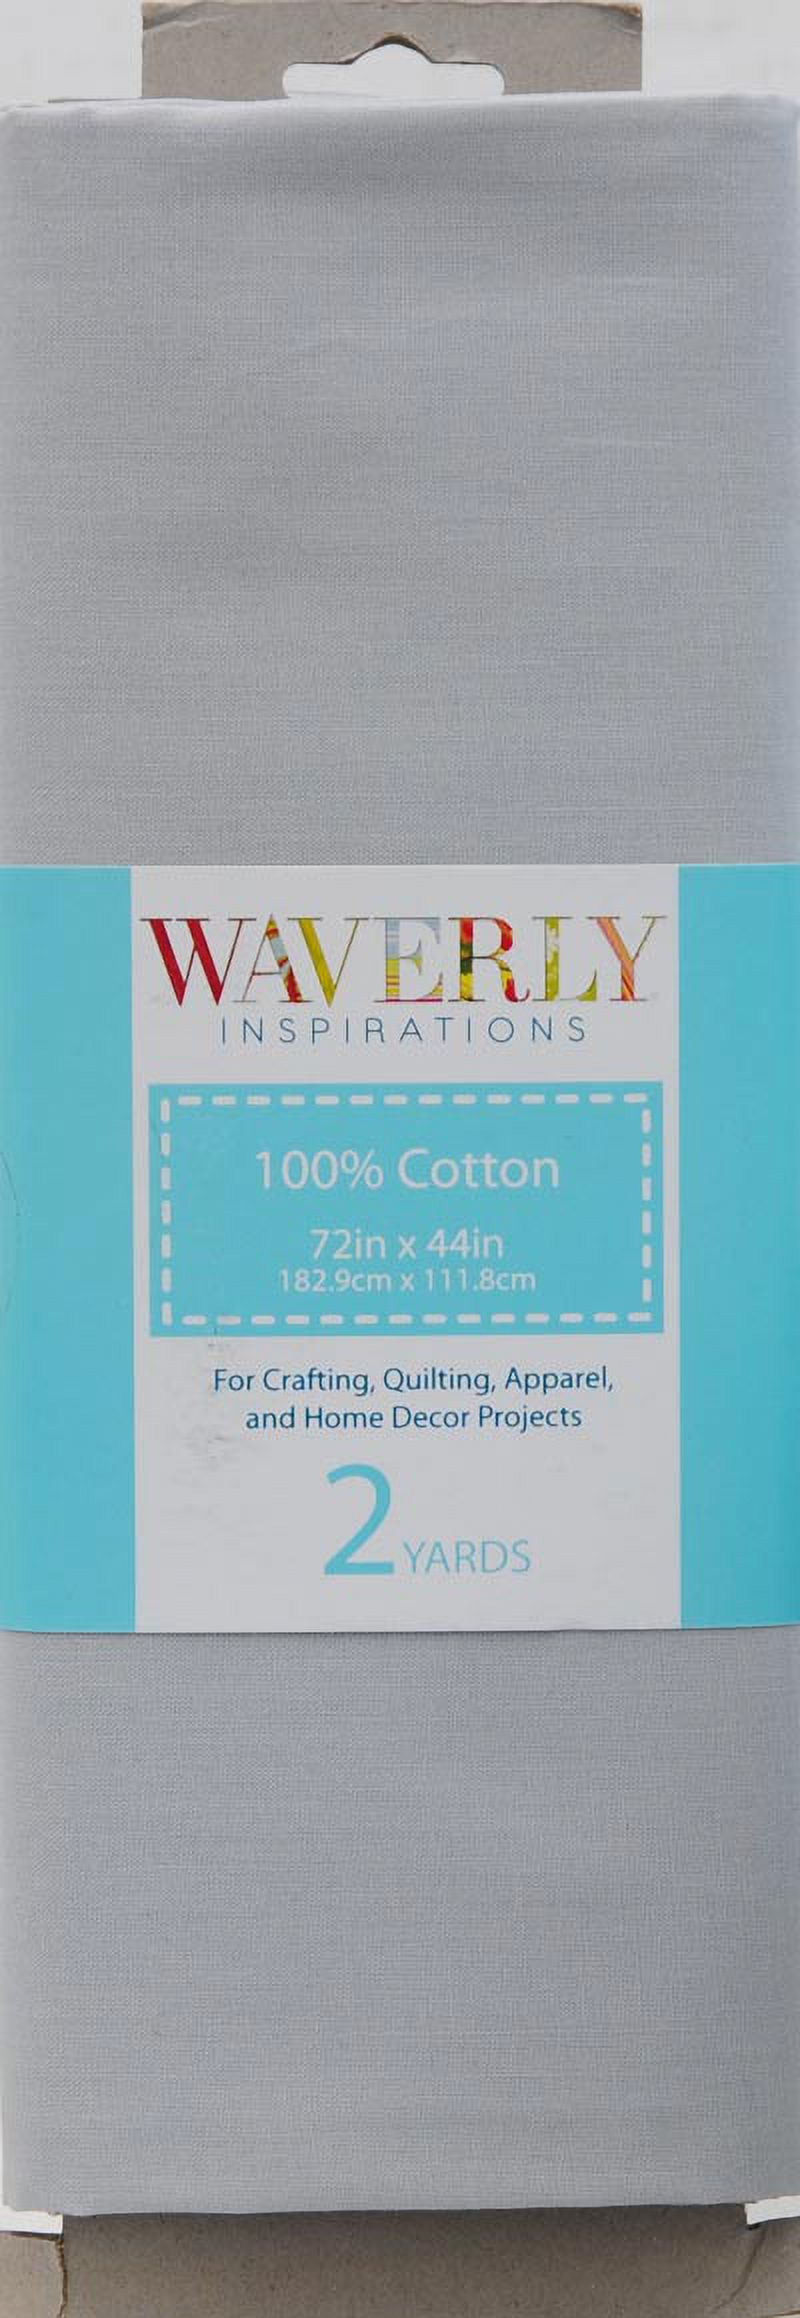 Waverly Inspirations 44" x 2 yd 100% Cotton Floral Sewing & Craft Fabric, Gray - image 2 of 2